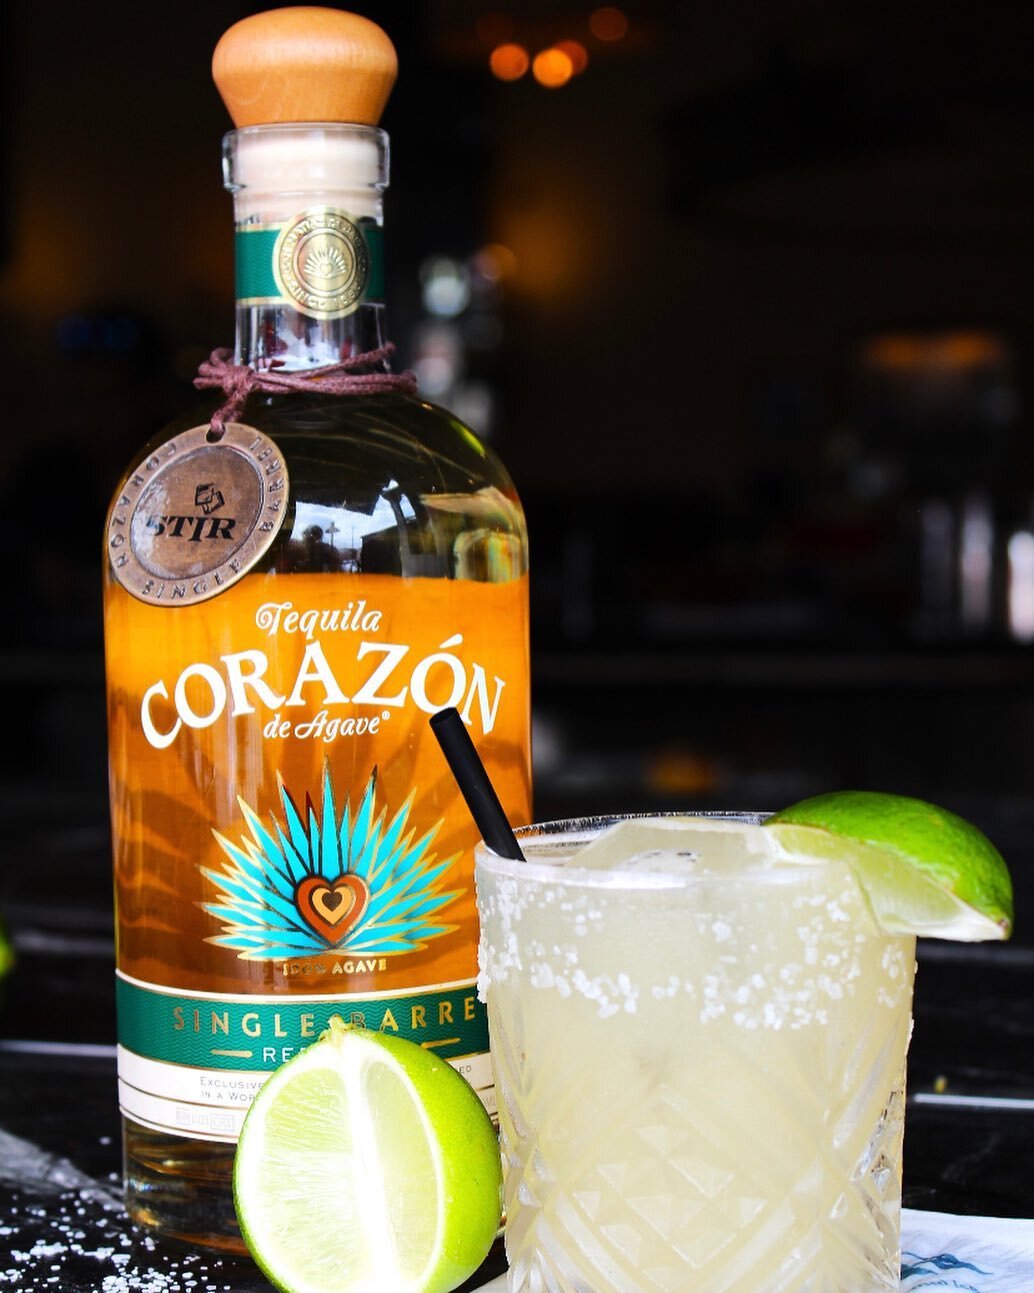 Introducing our long-anticipated Corazon Reposado Private Barrel, rested for 2 months in our very own Blanton&rsquo;s Private Barrel at STIR! Savor the rich flavors and hints of oak from this unique aging process, as you indulge in a Corazon Reposado